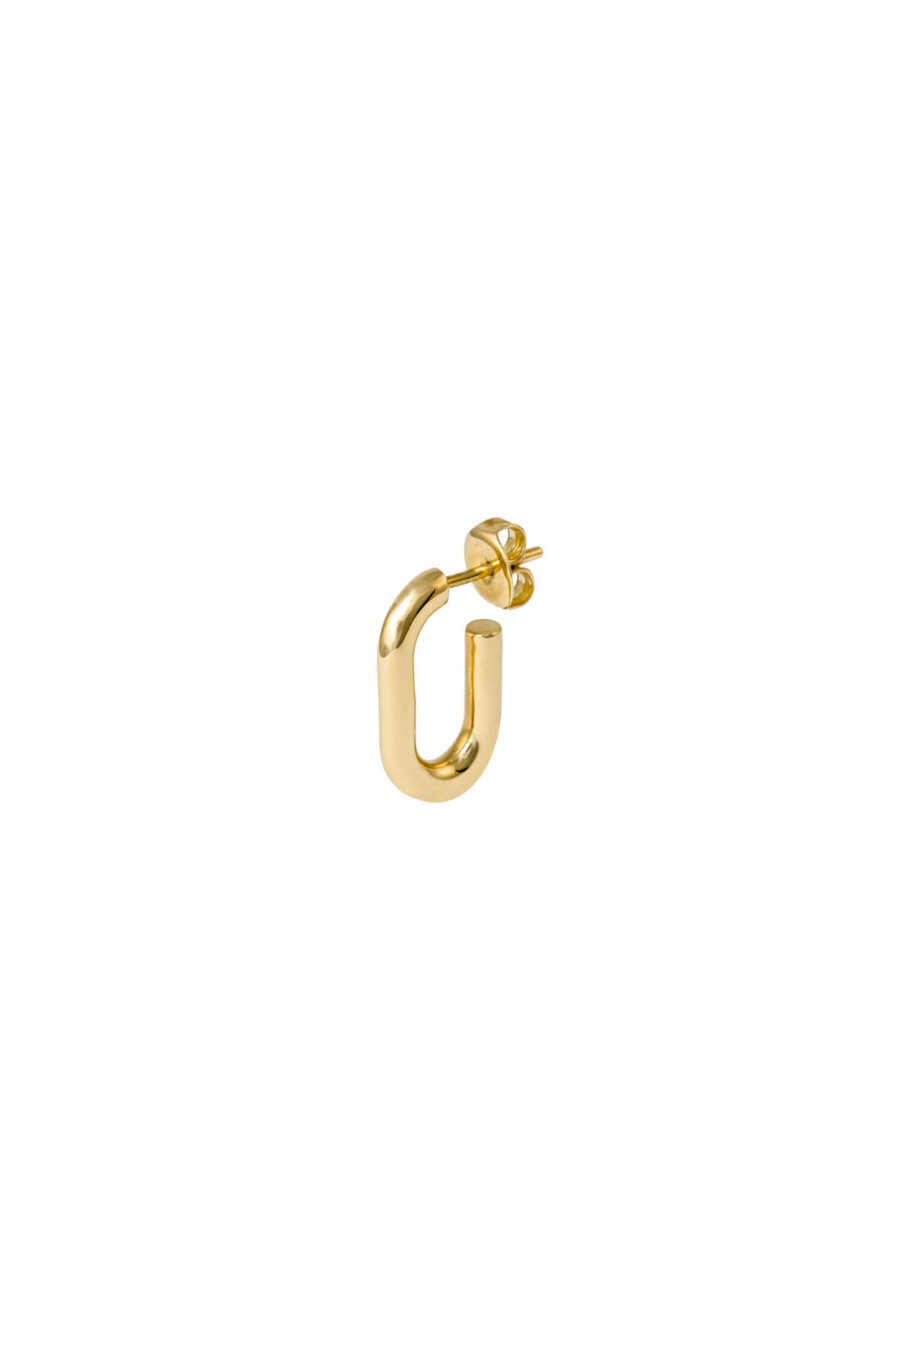 the-small-golden-link-earring-by-glenda-lopez-lateral